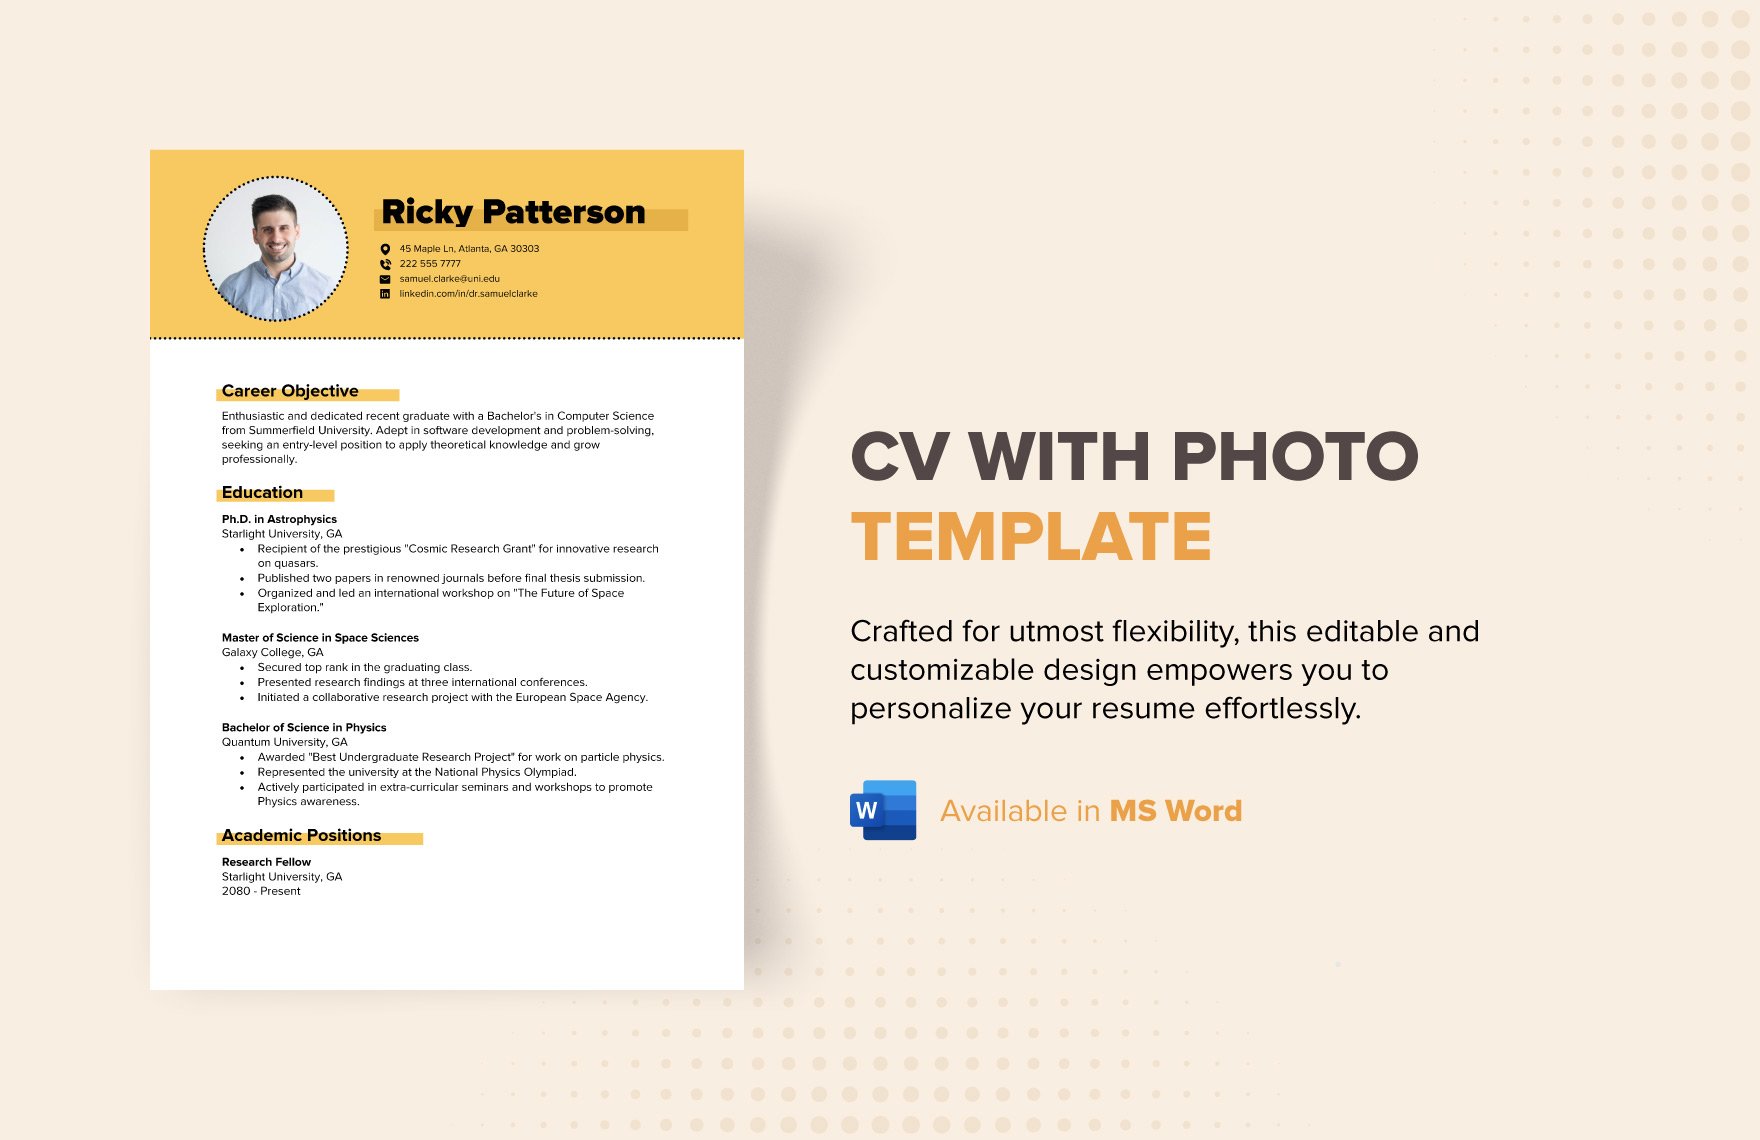 CV with Photo Template